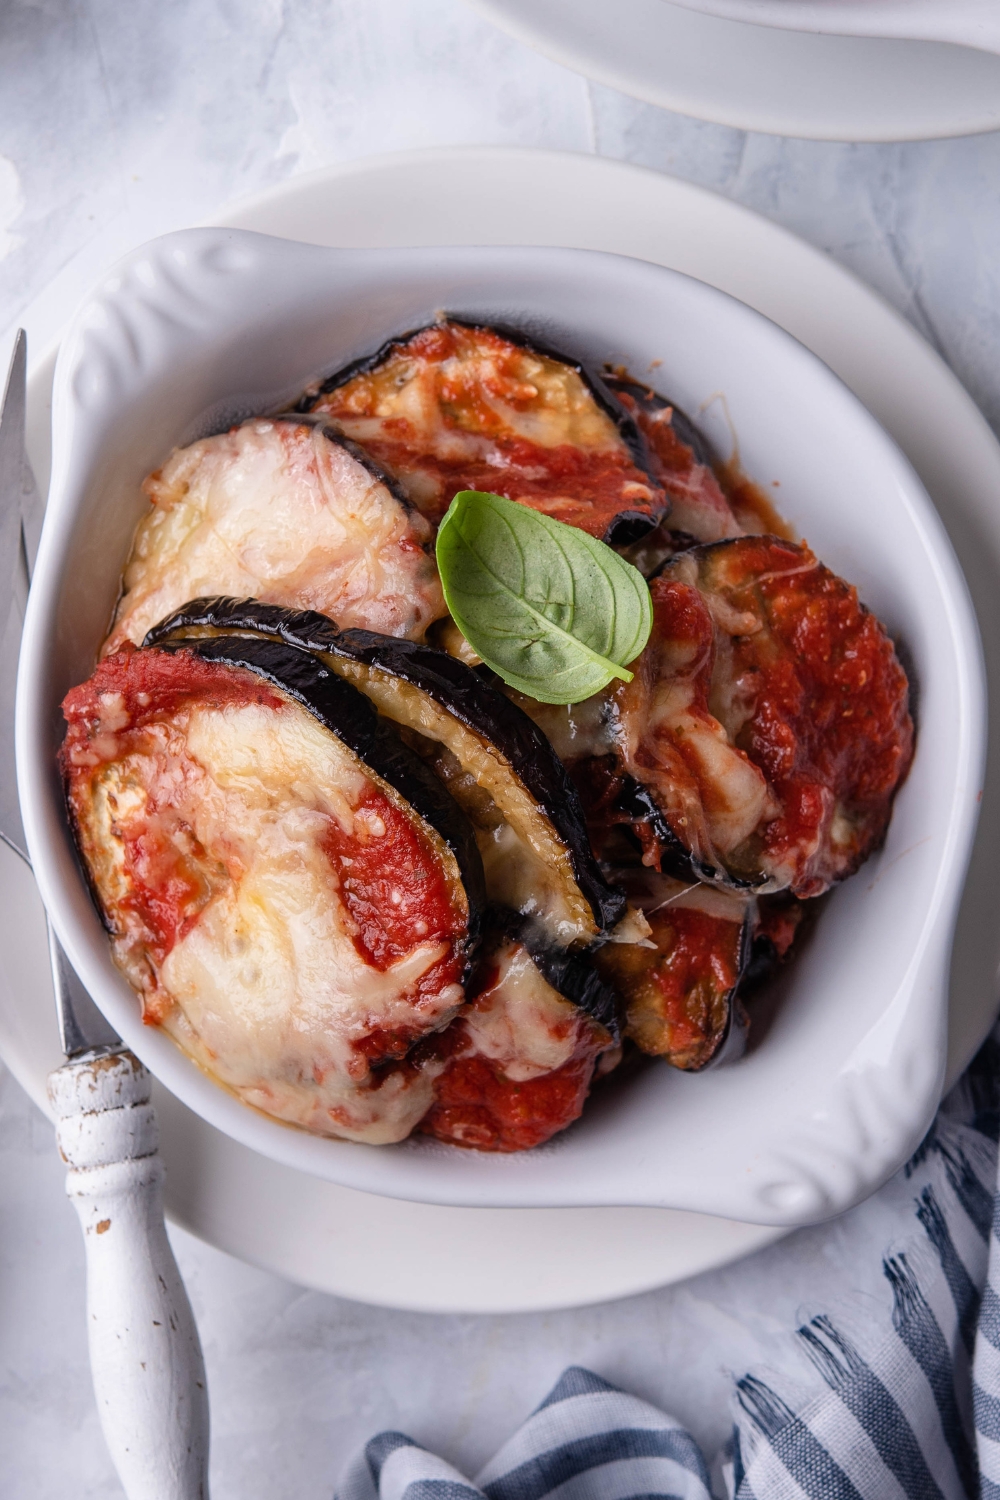 Eggplant parmesan slices in a white bowl.